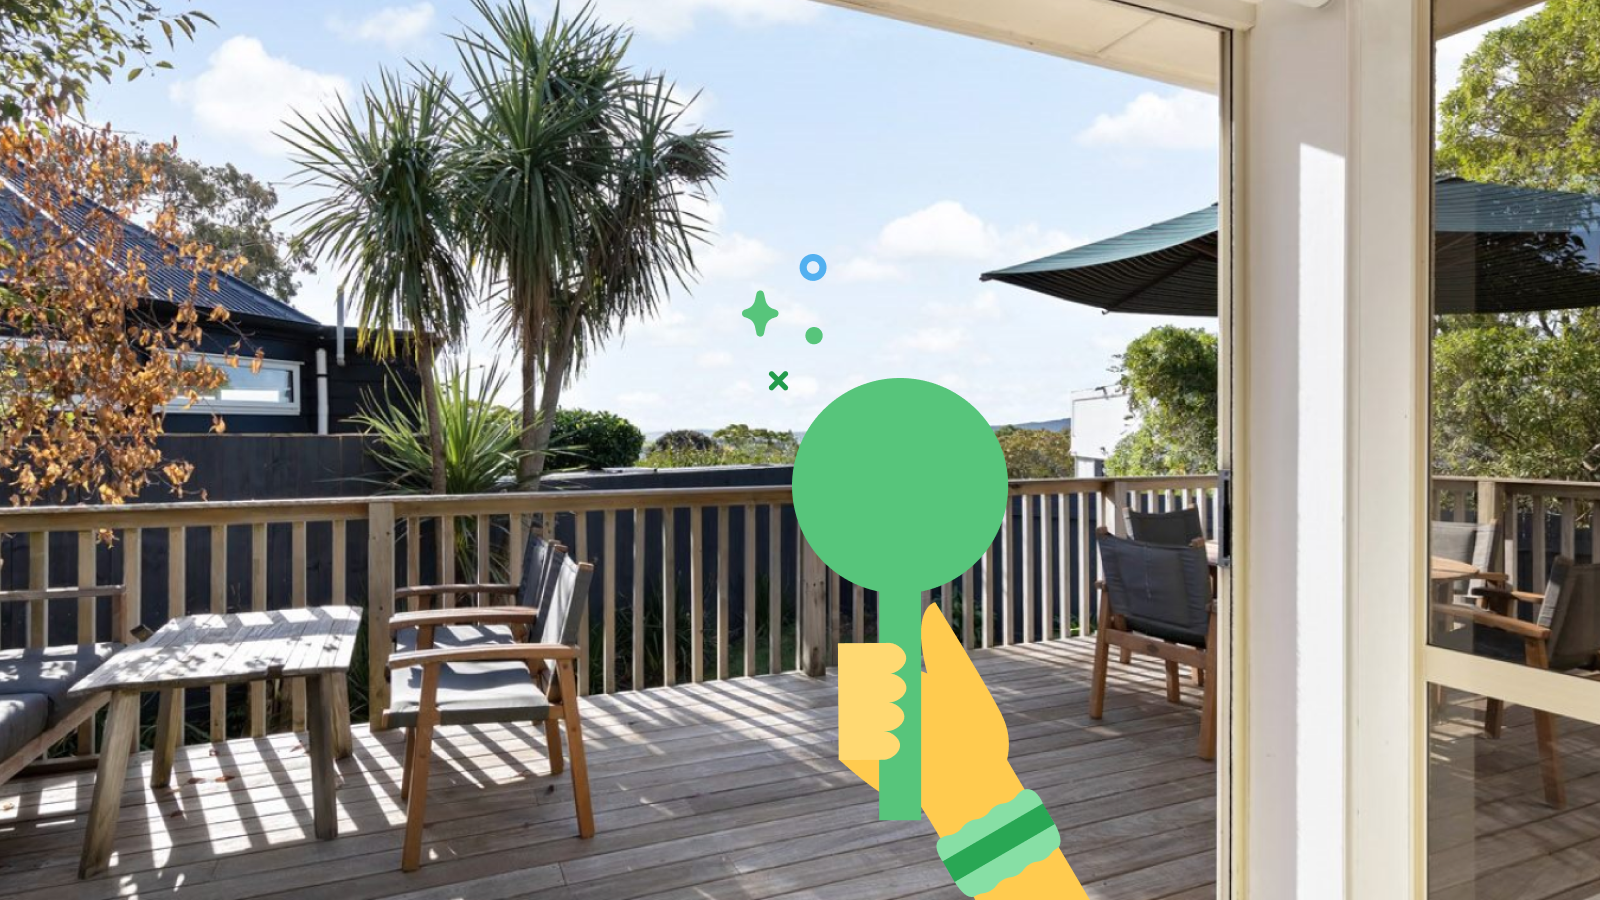 Looking out onto a deck with a view of trees and the ocean, an illustration of a yellow hand holding a green bidding paddles with sparkles over it.